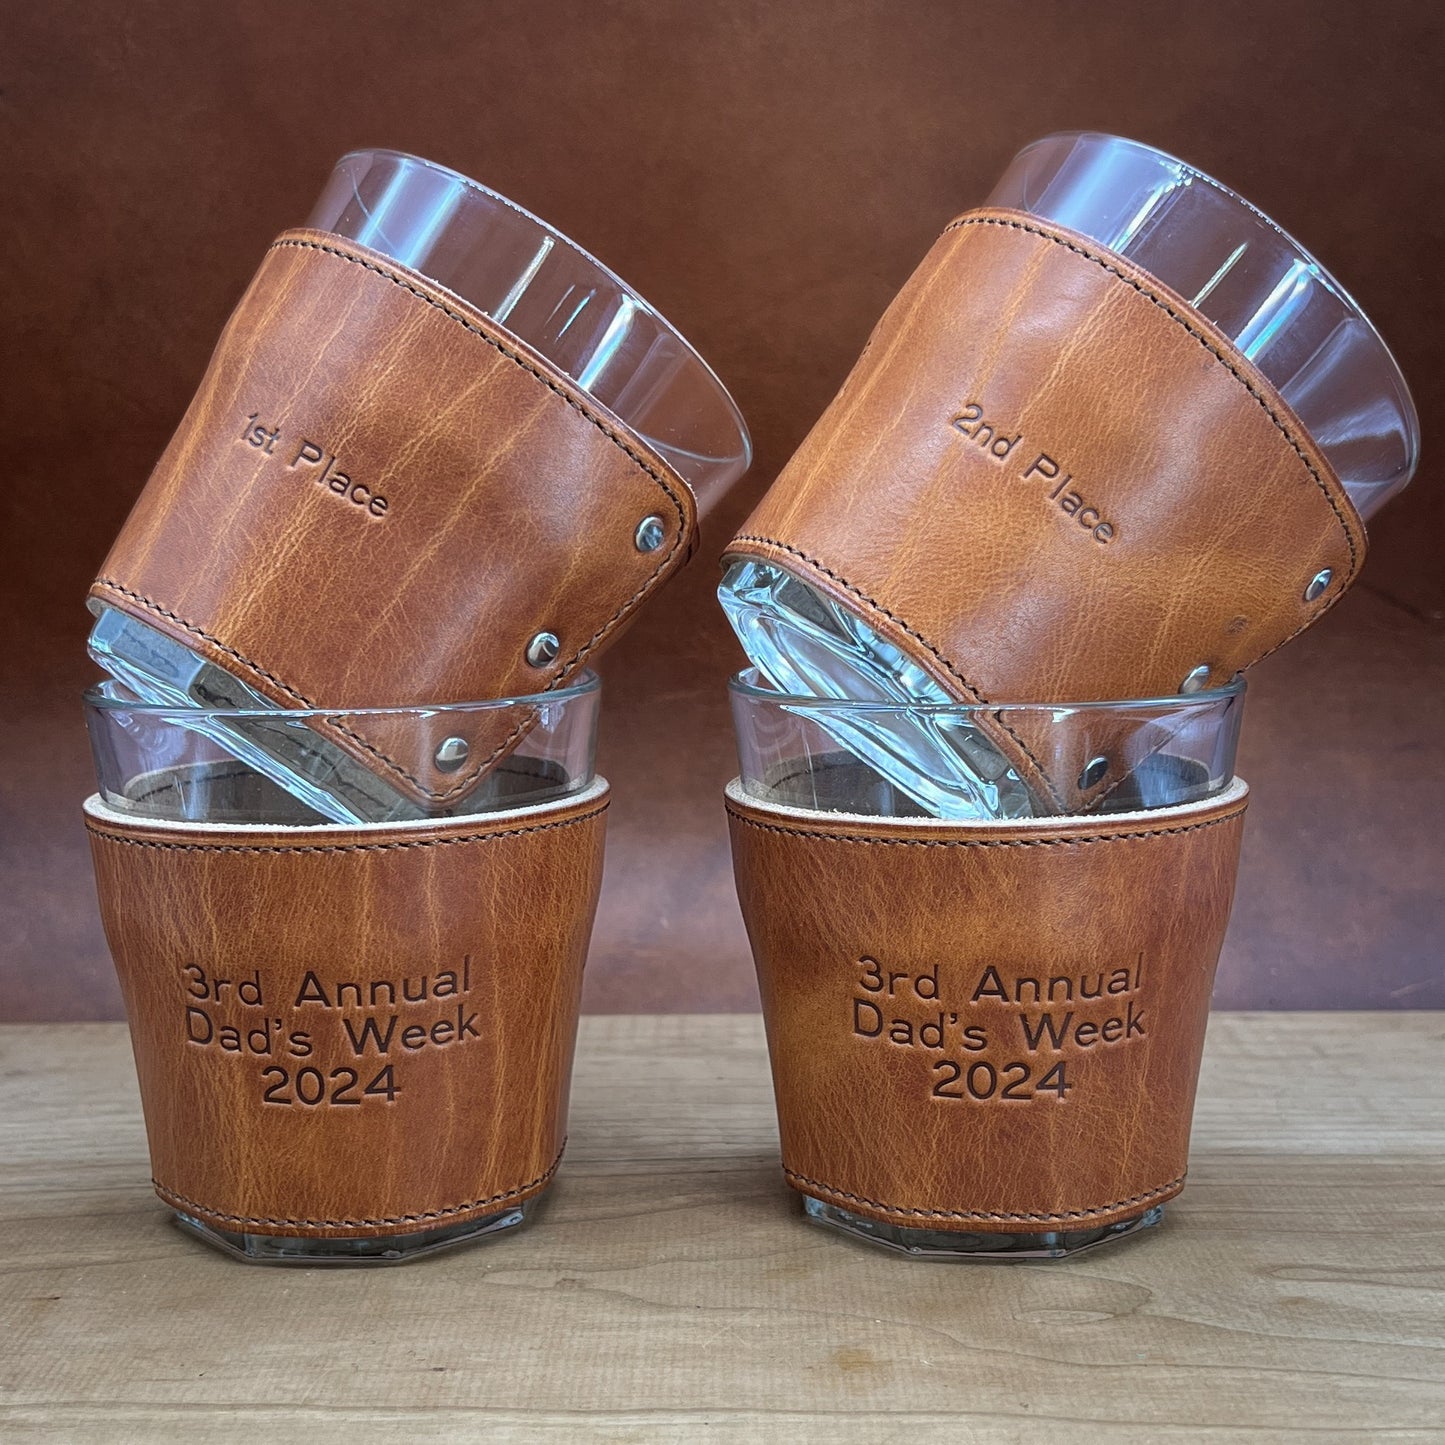 Custom Whiskey Glasses Celebrating A Dad’s Weekend Golf Tournament.